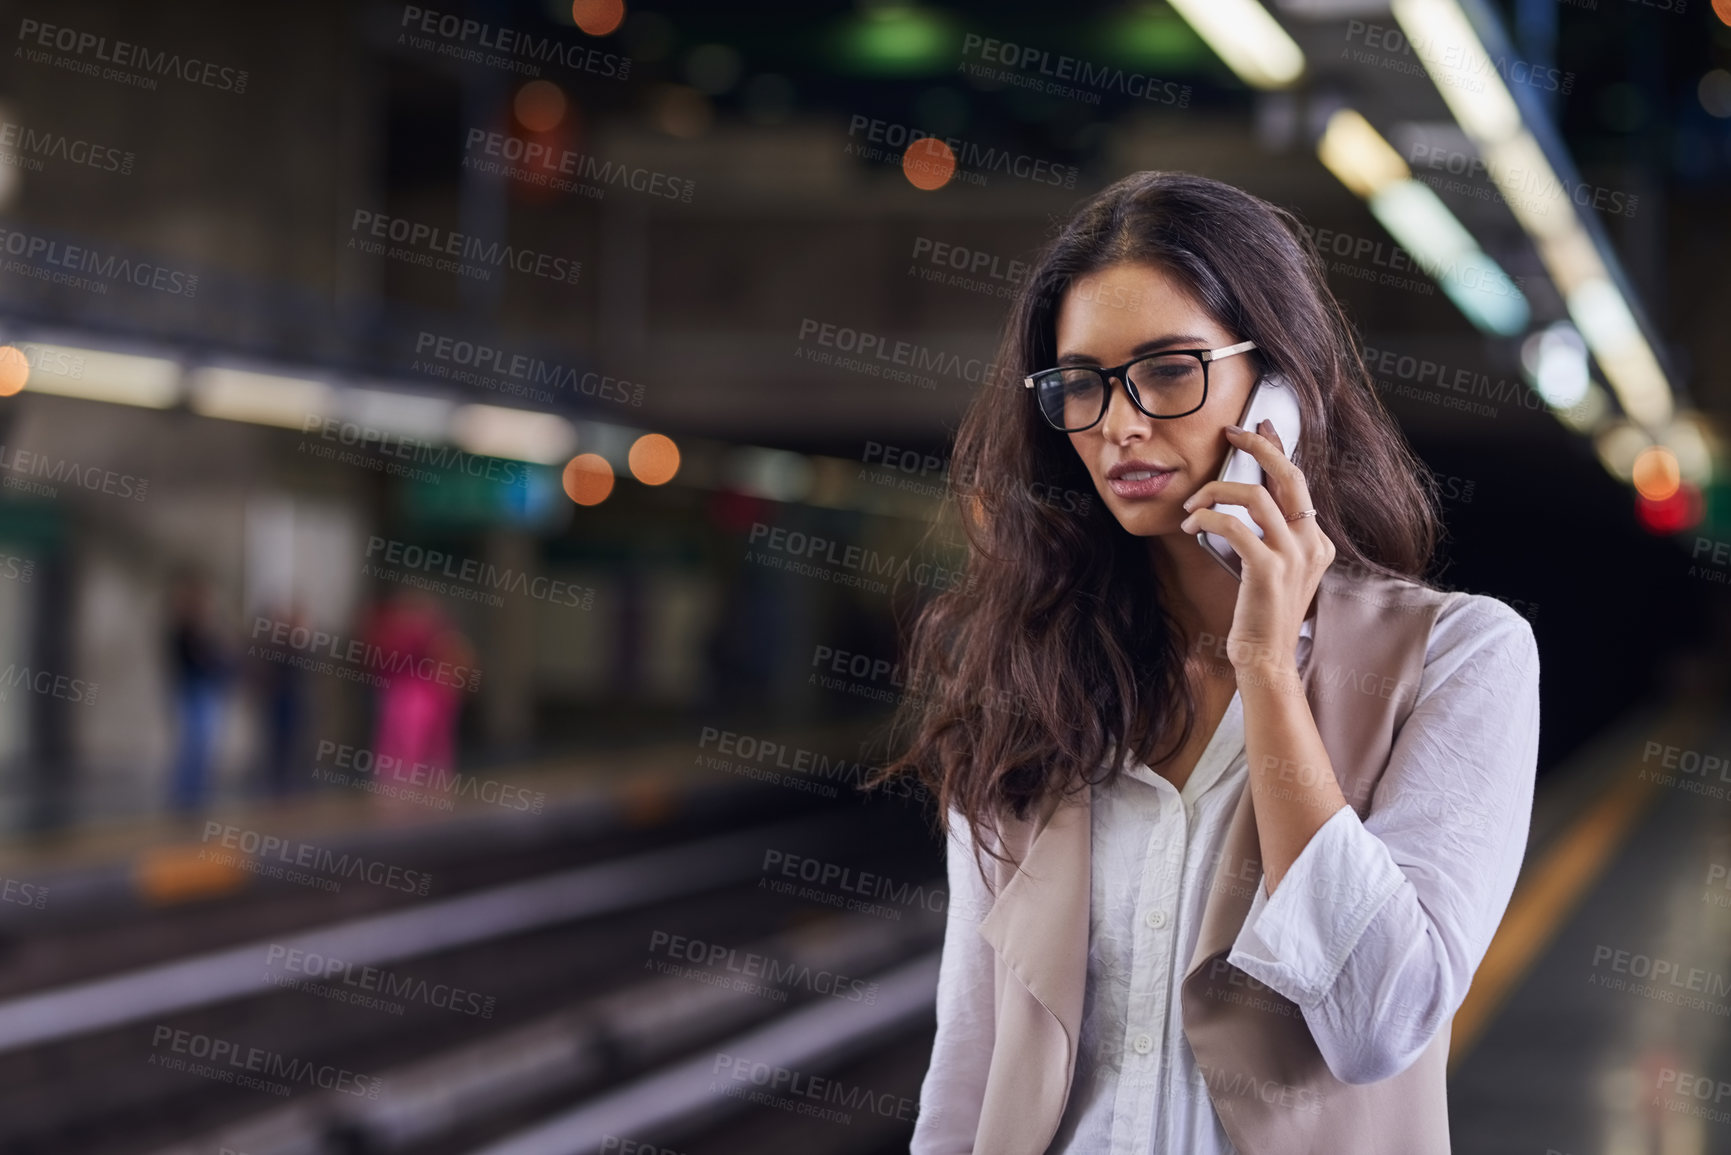 Buy stock photo Cropped shot of a young attractive woman on a call and using the train to commute